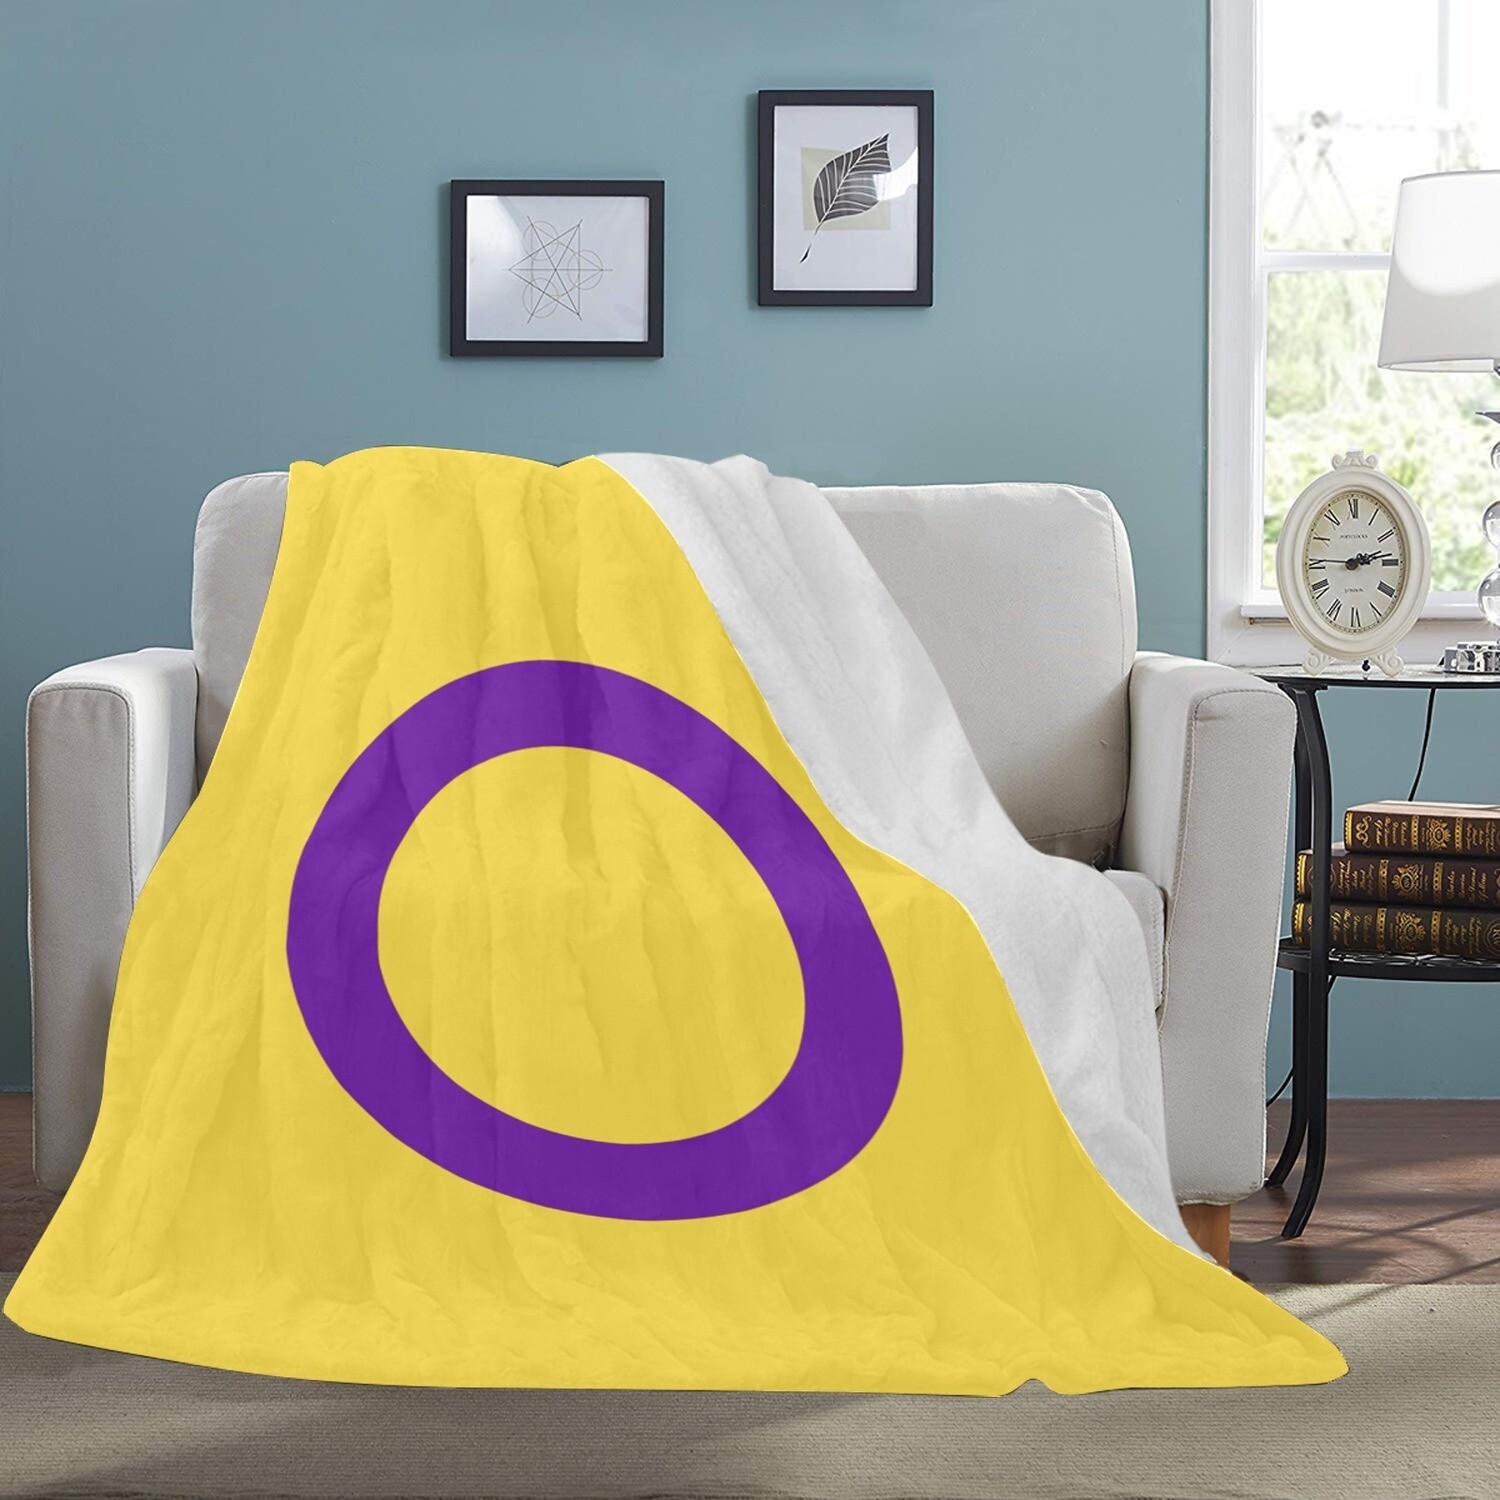 🤴🏽👸🏽🏳️‍🌈 Large Ultra-Soft Micro Fleece Blanket Love is Love Intersex Pride Flag by OII Australia 2013, gift, gift for her, gift for him, gift for them, 70"x80"